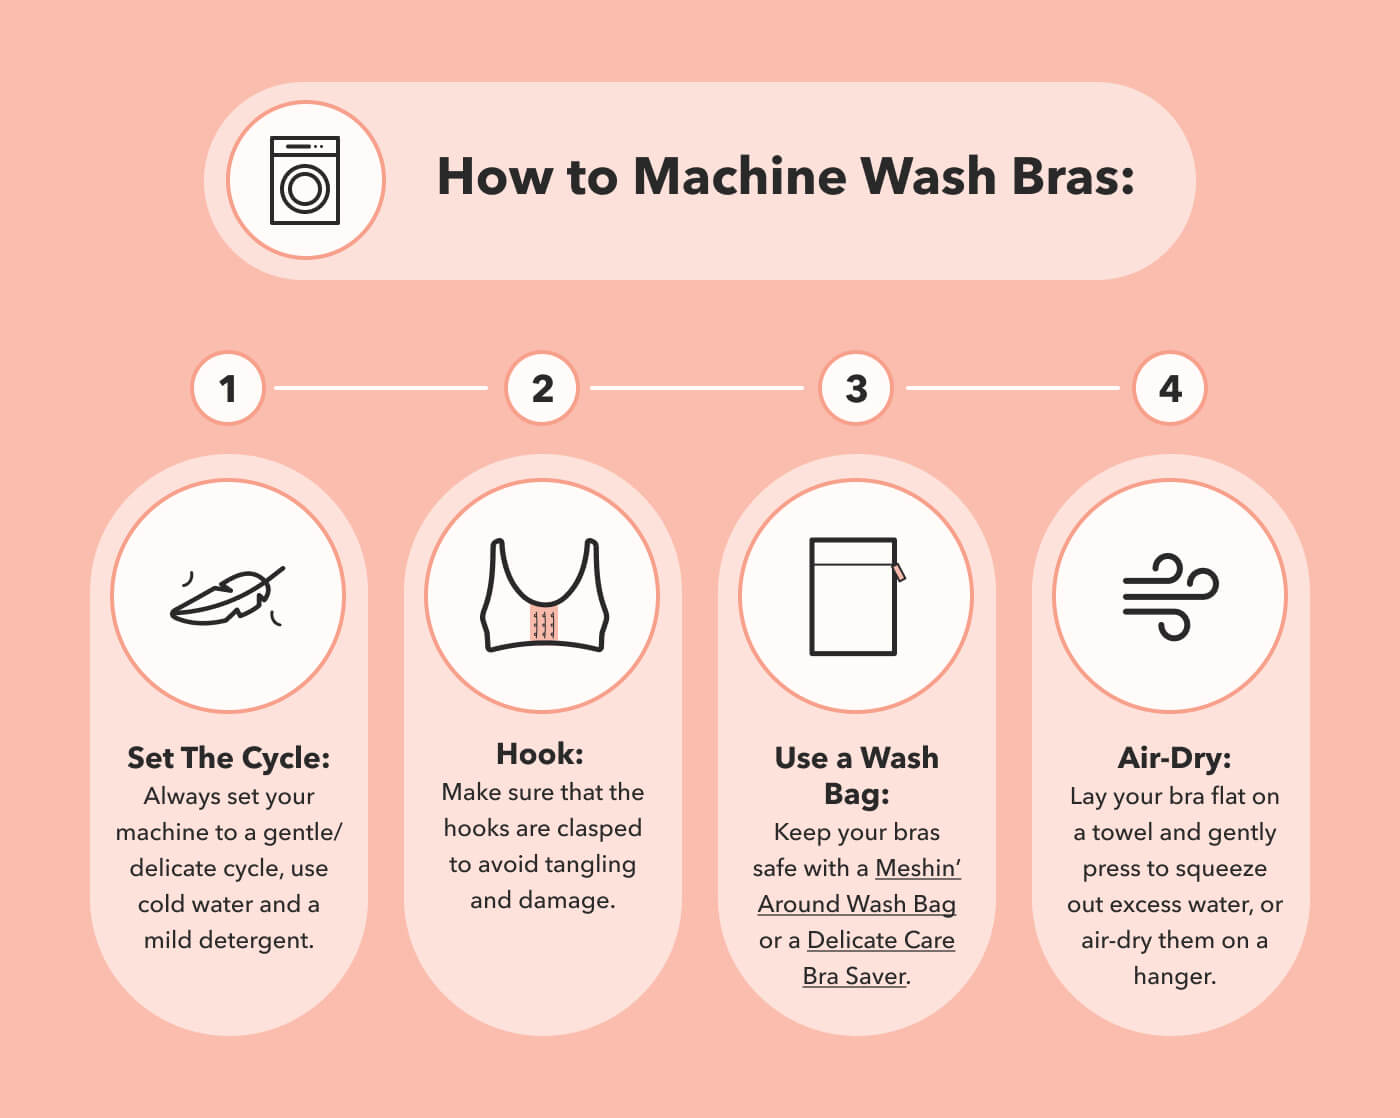 How to wash bras in the washing machine - Reviewed